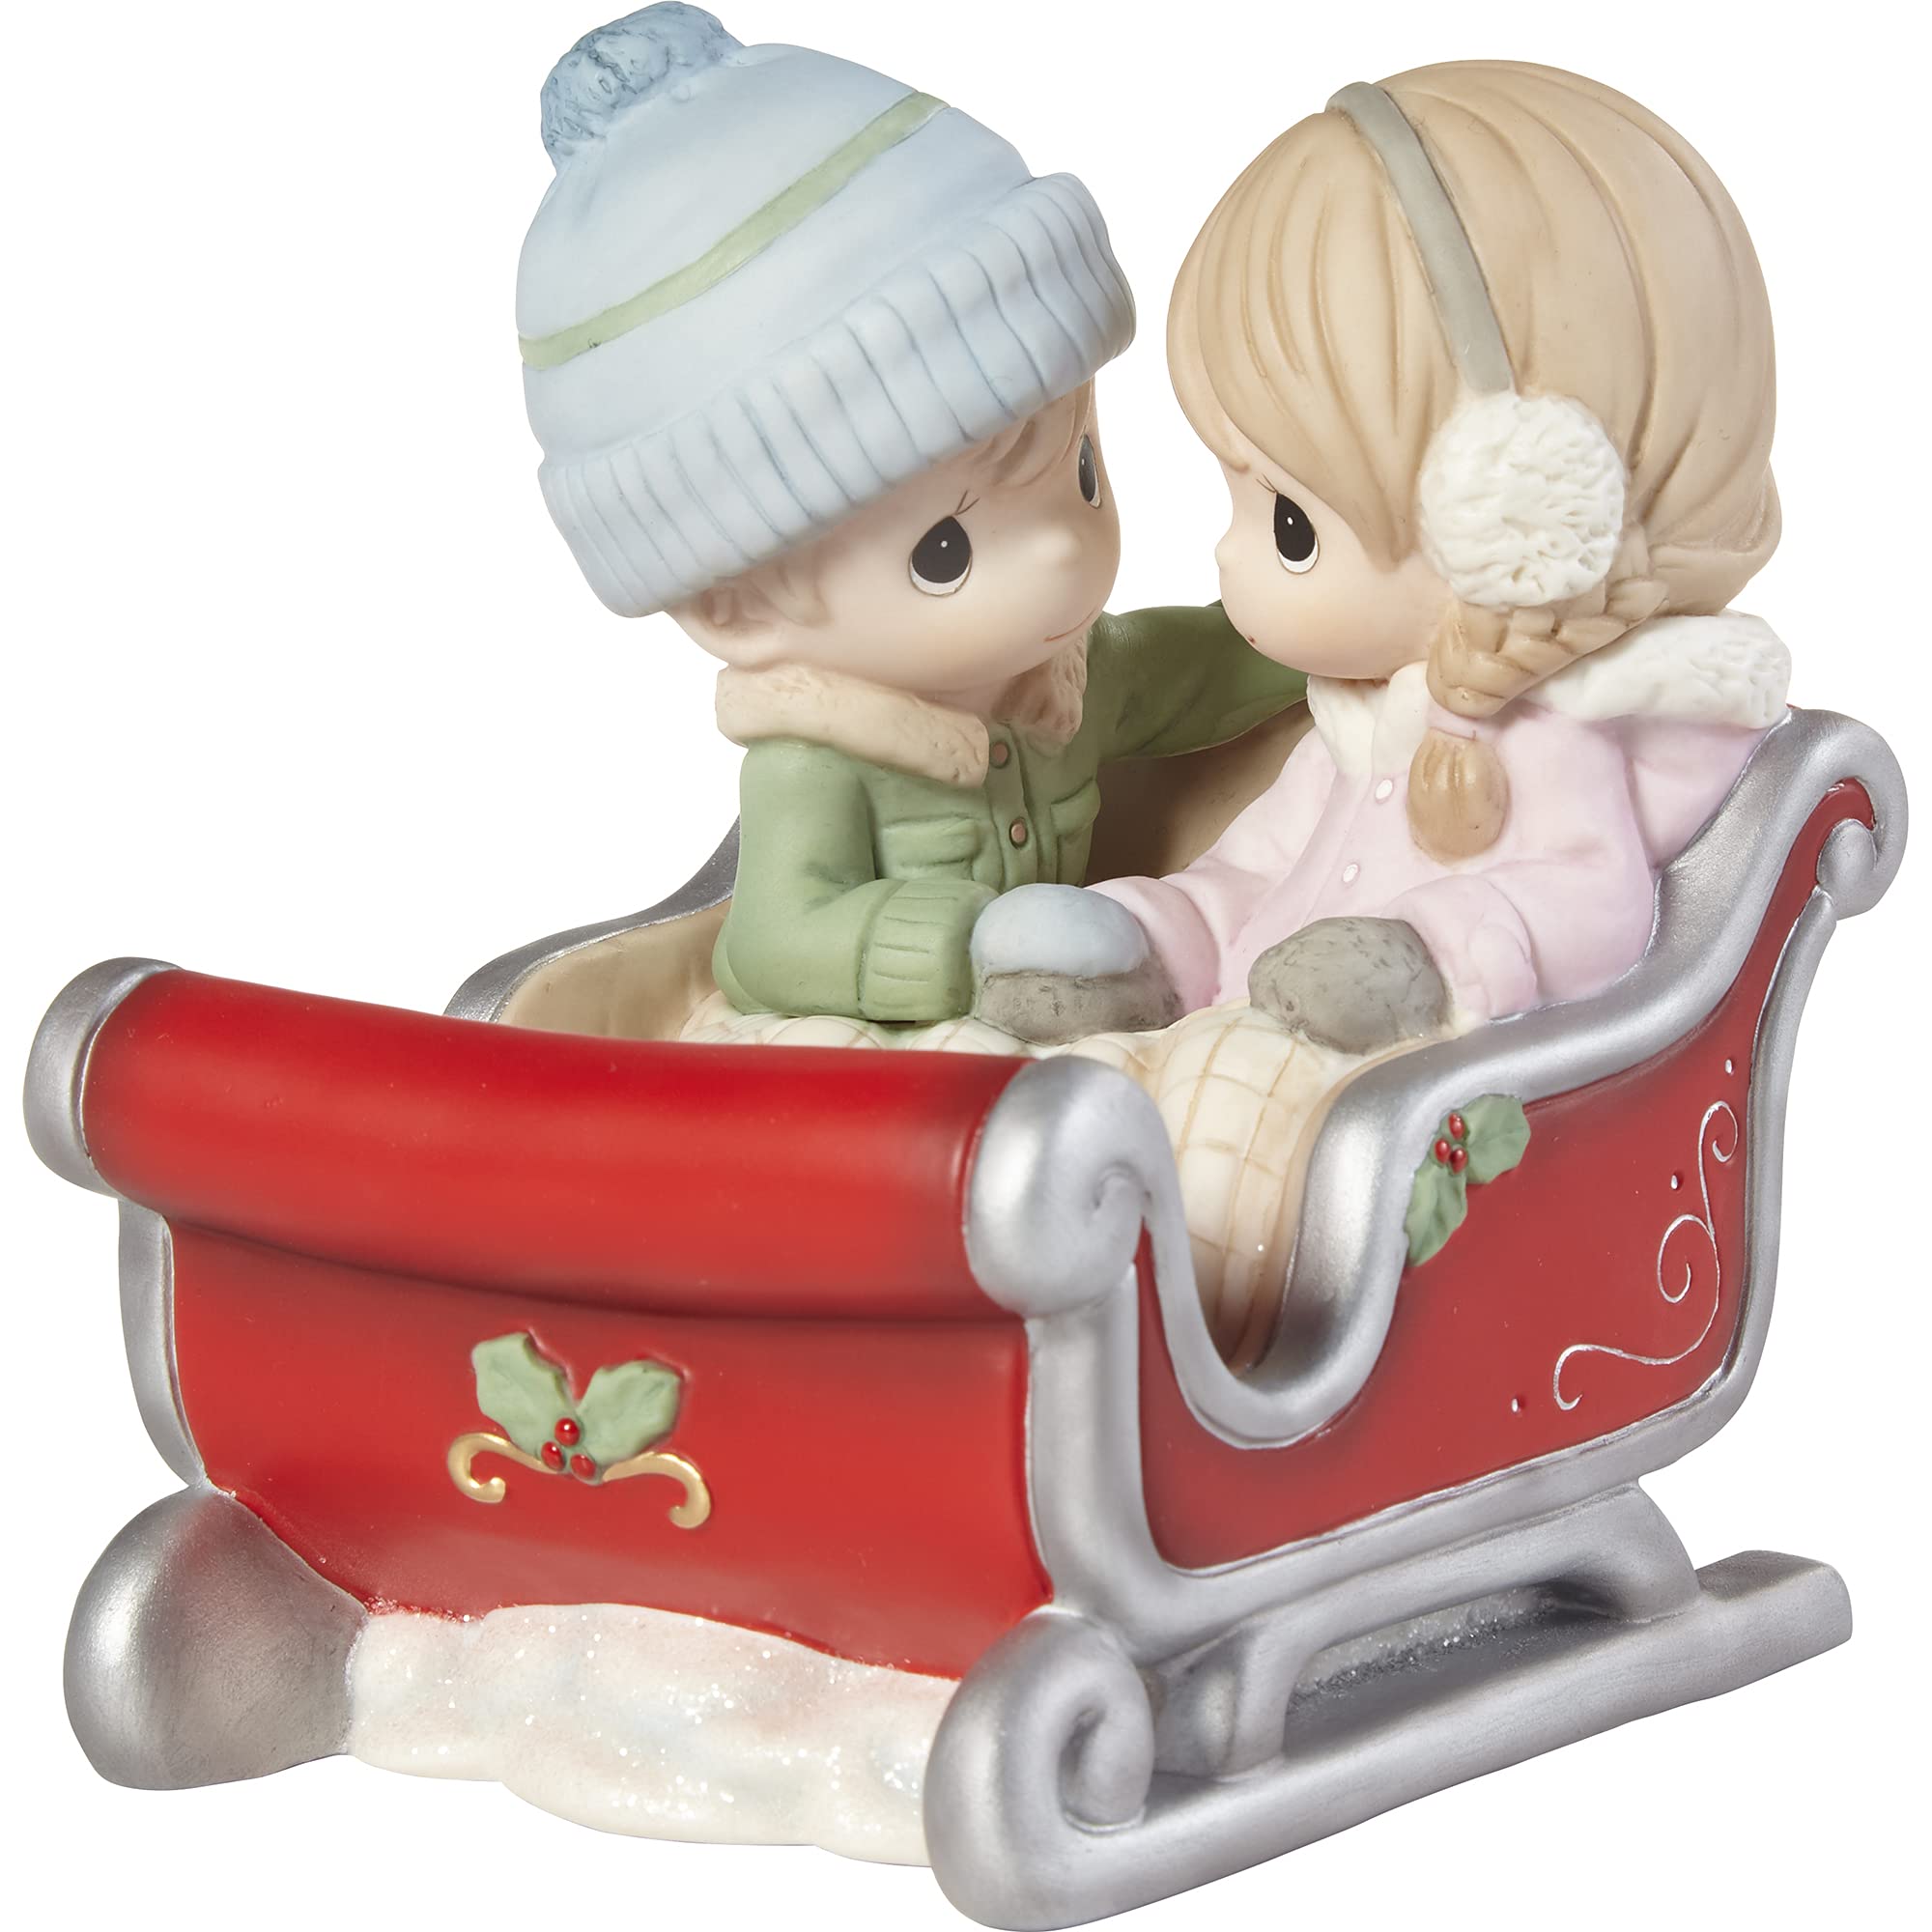 Precious Moments A Cozy Ride by Your Side Figurine 211044 , White